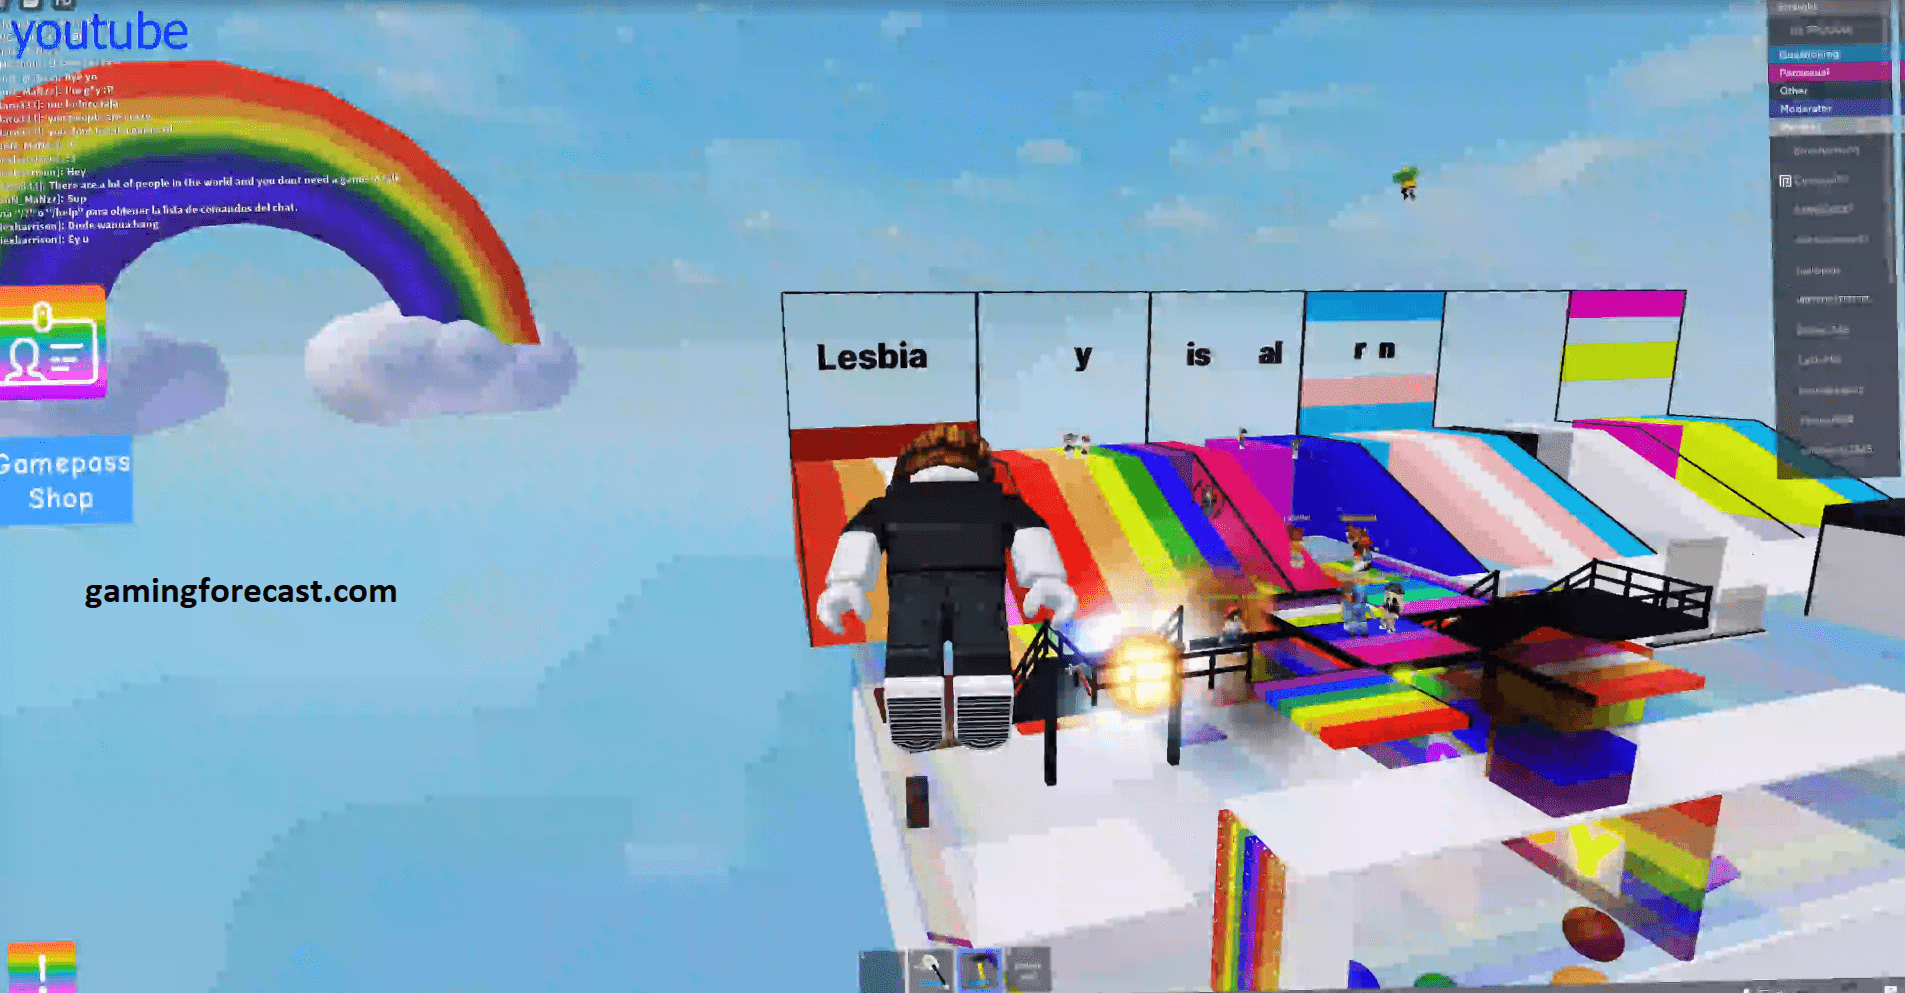 Roblox Hack Download Pc Destroy Lobby Fly Aimbot Scripts 2021 Gaming Forecast Download Free Online Game Hacks - how to hack roblox games on pc